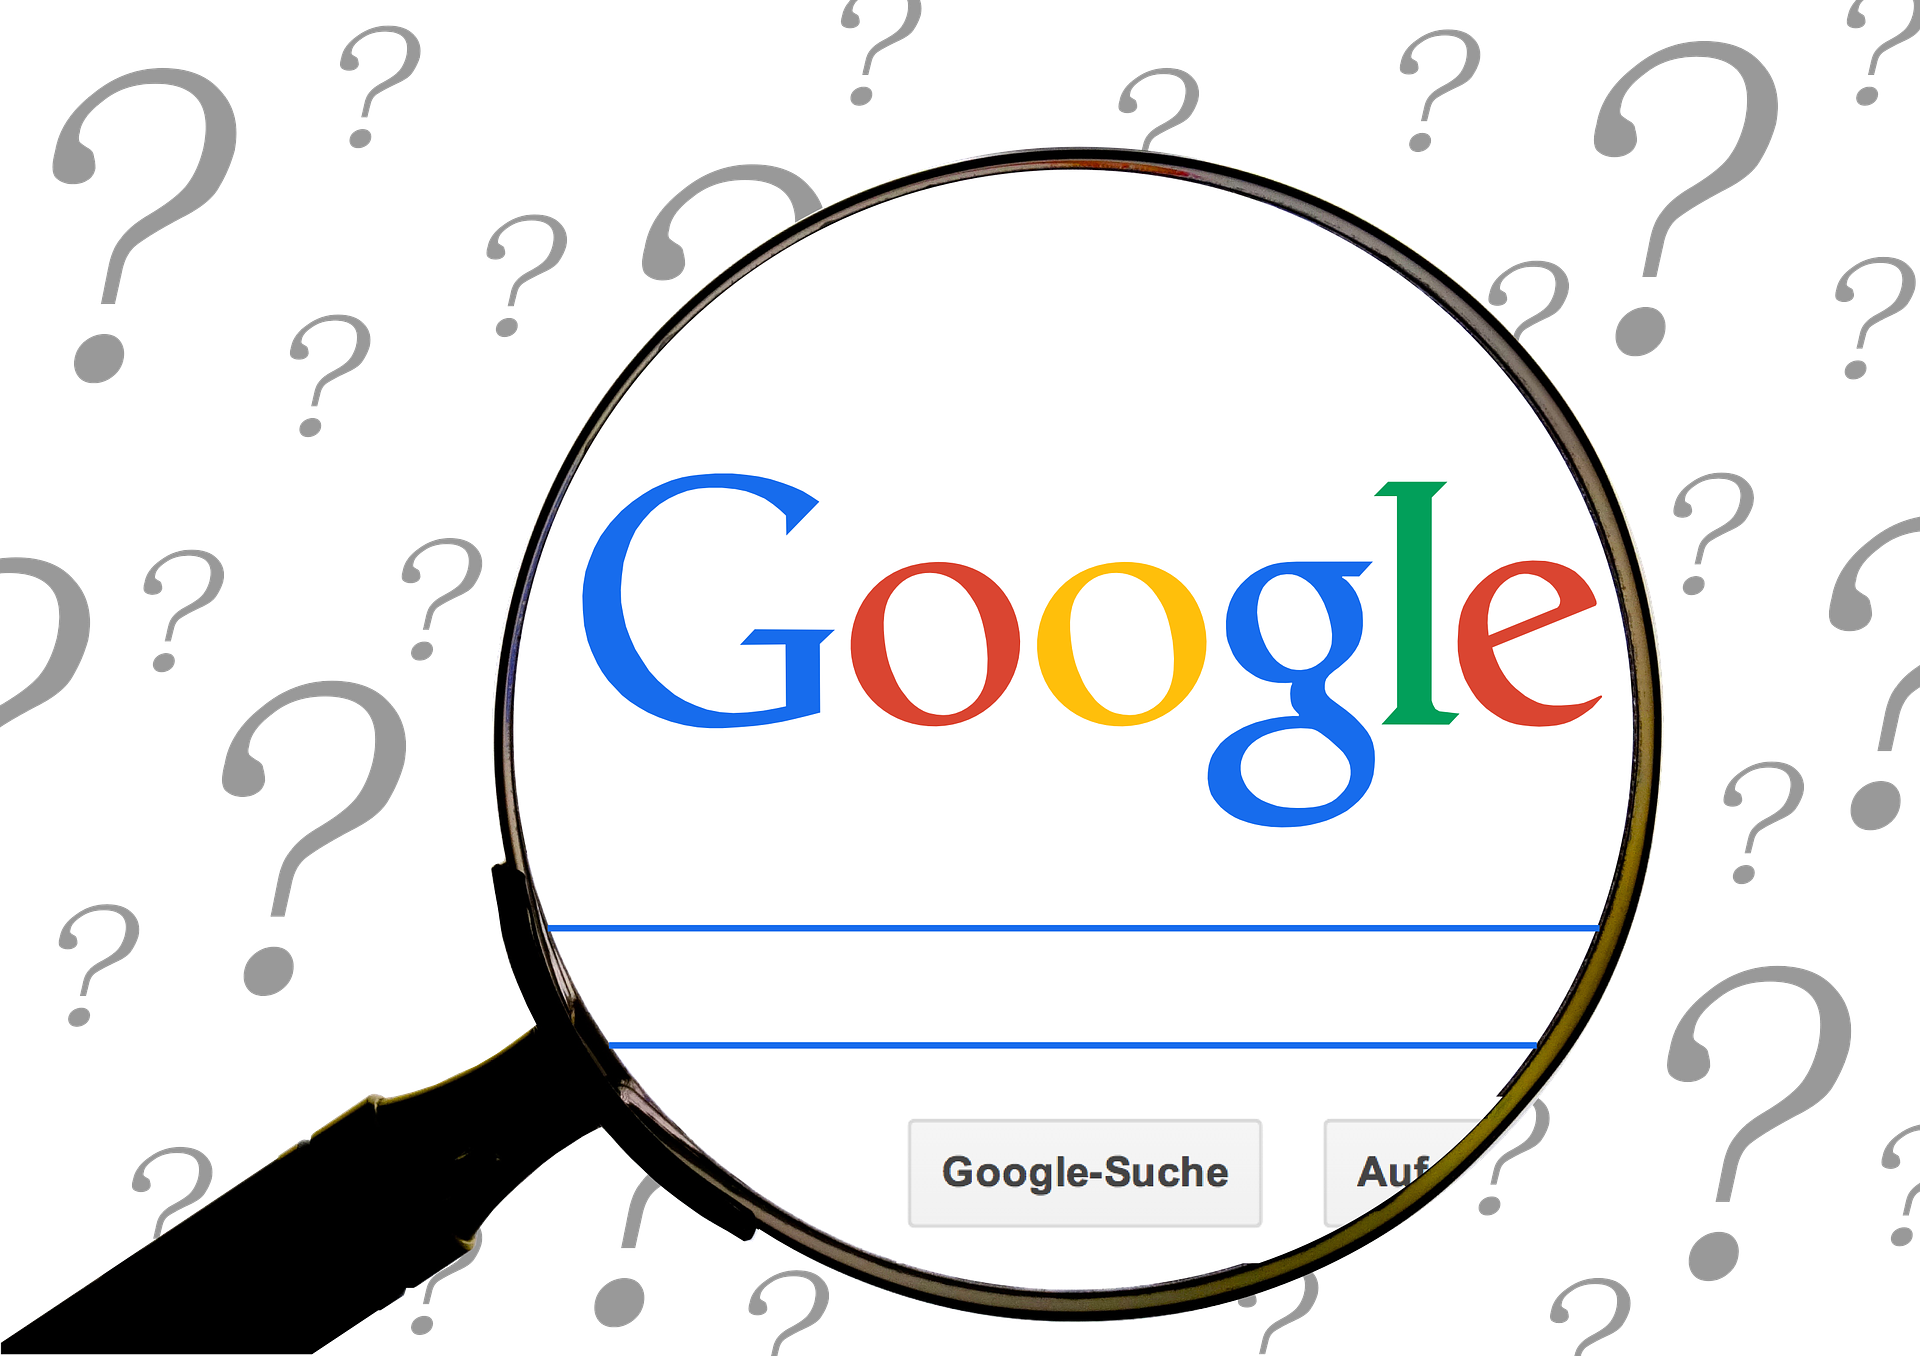 Google: “Ask ‘Who, How, and Why’ About Your Content”